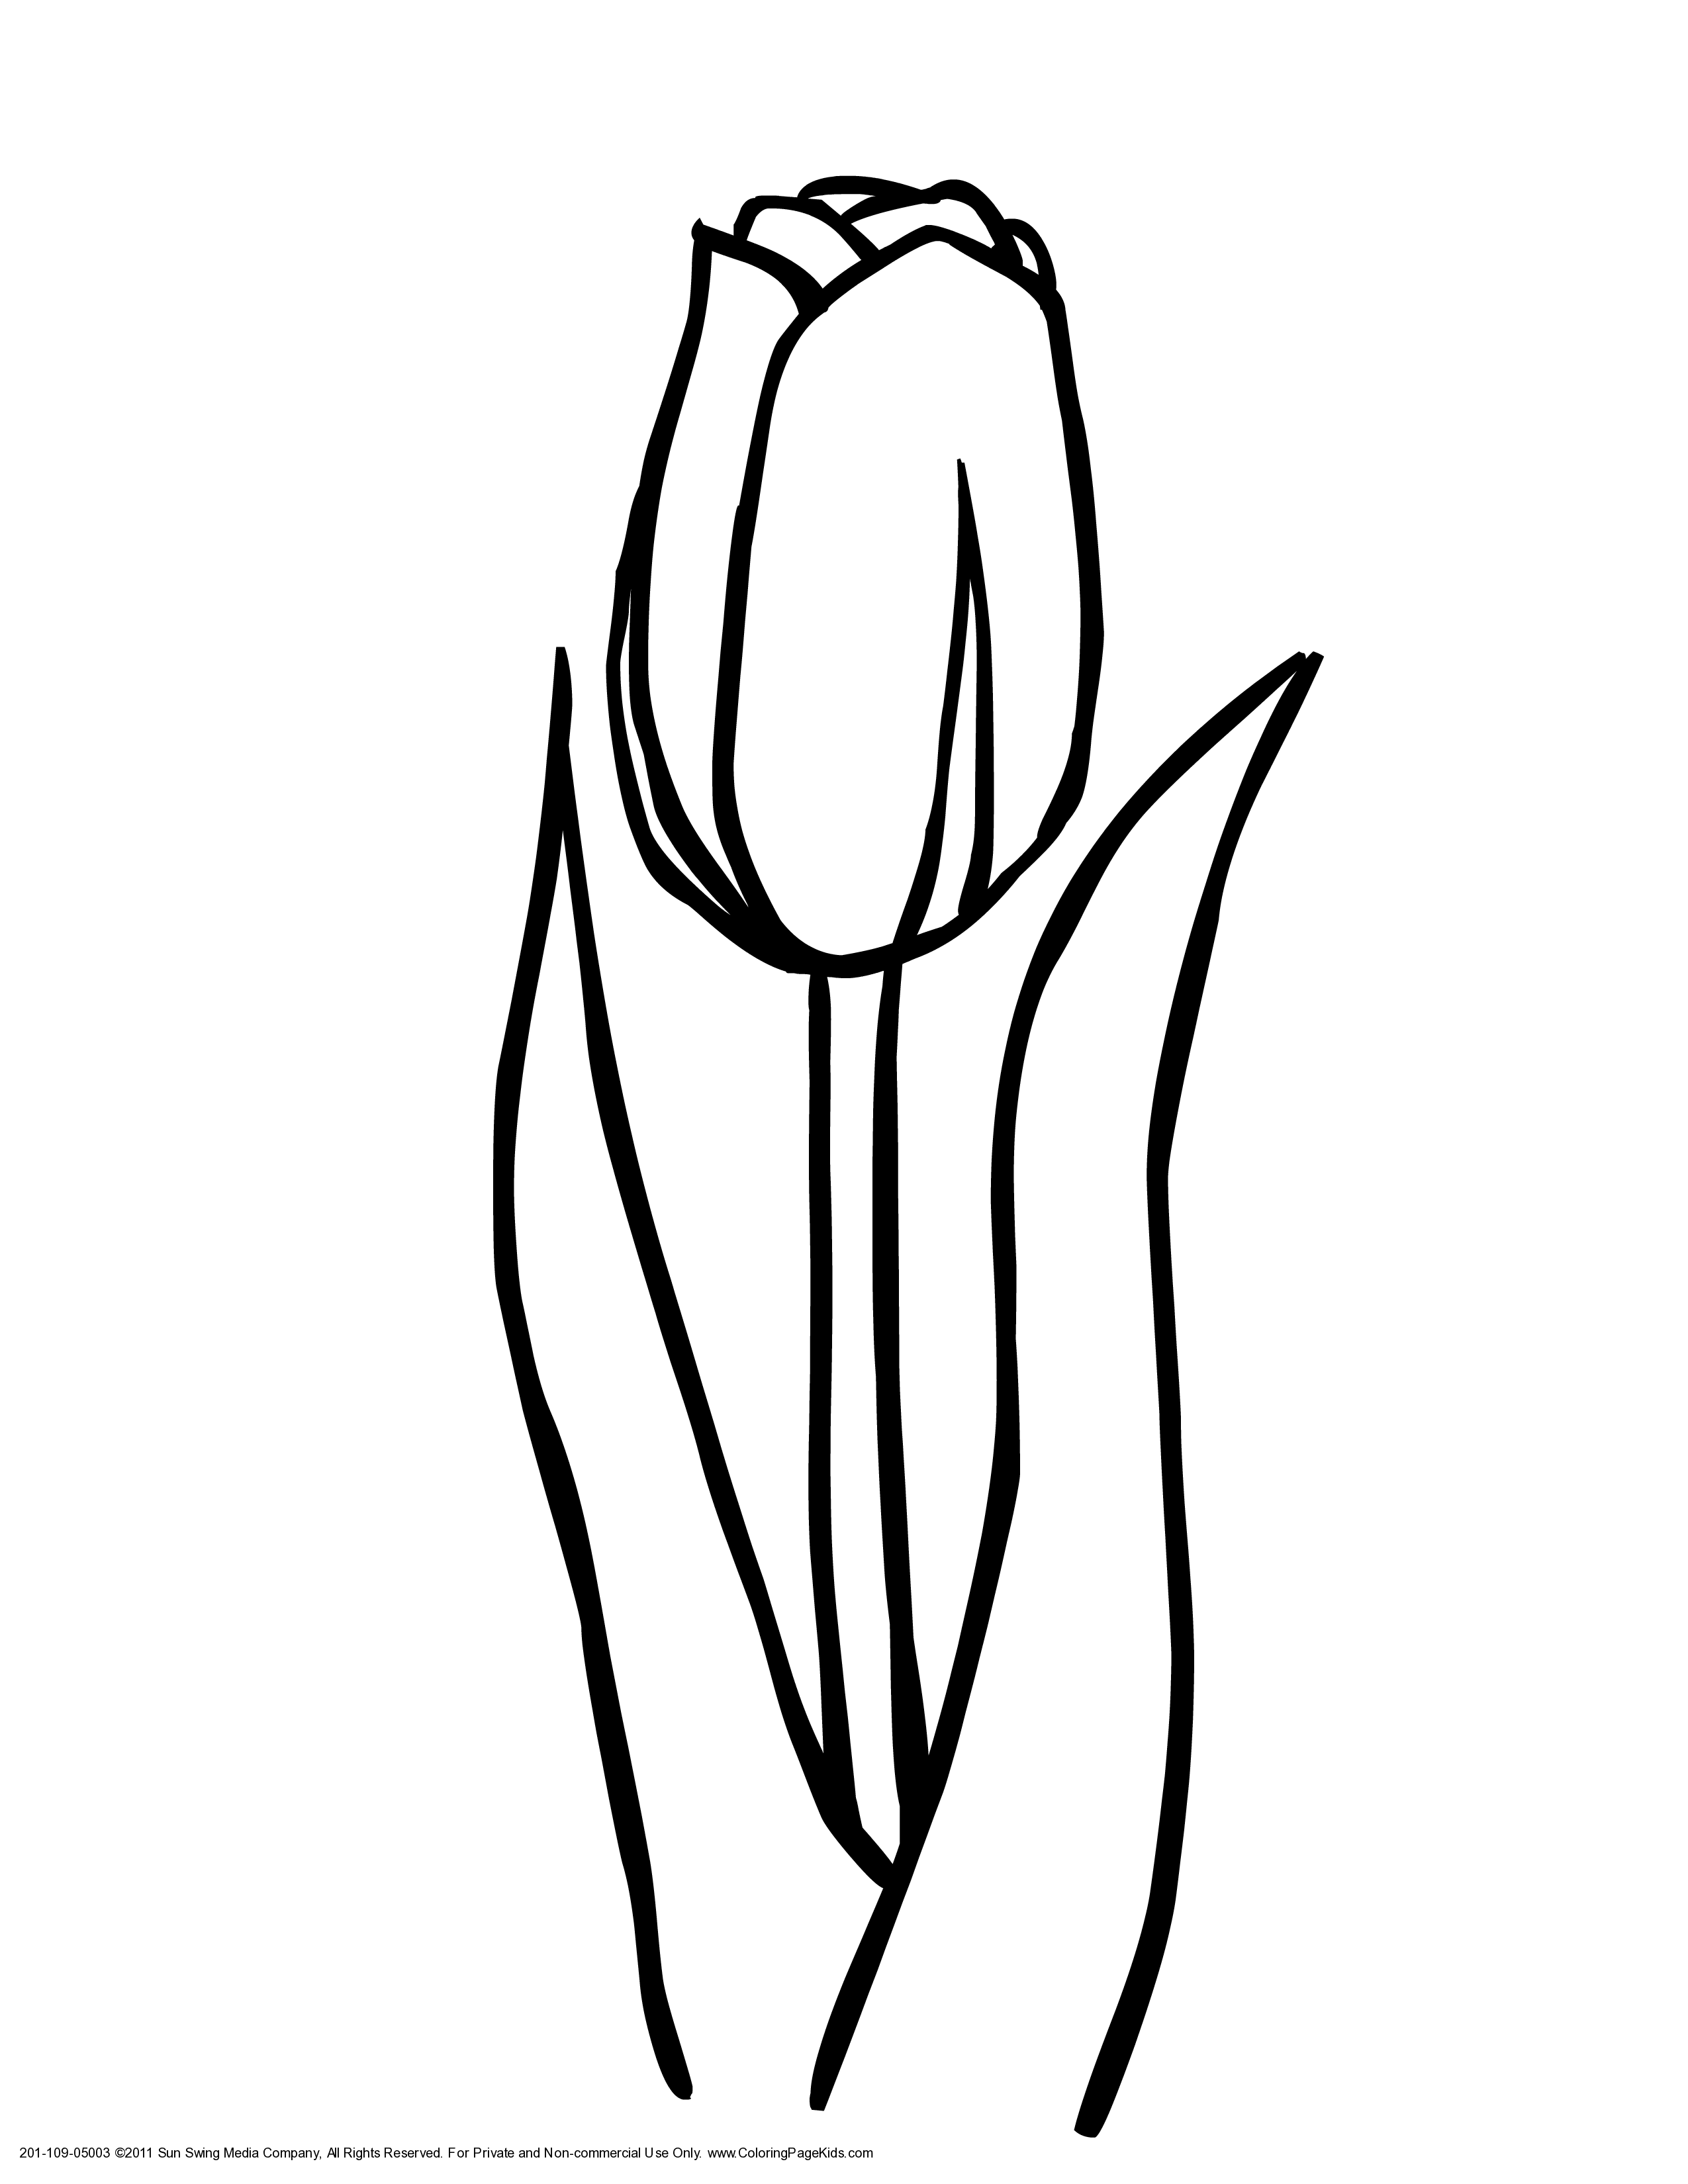 Tulip coloring pages to download and print for free